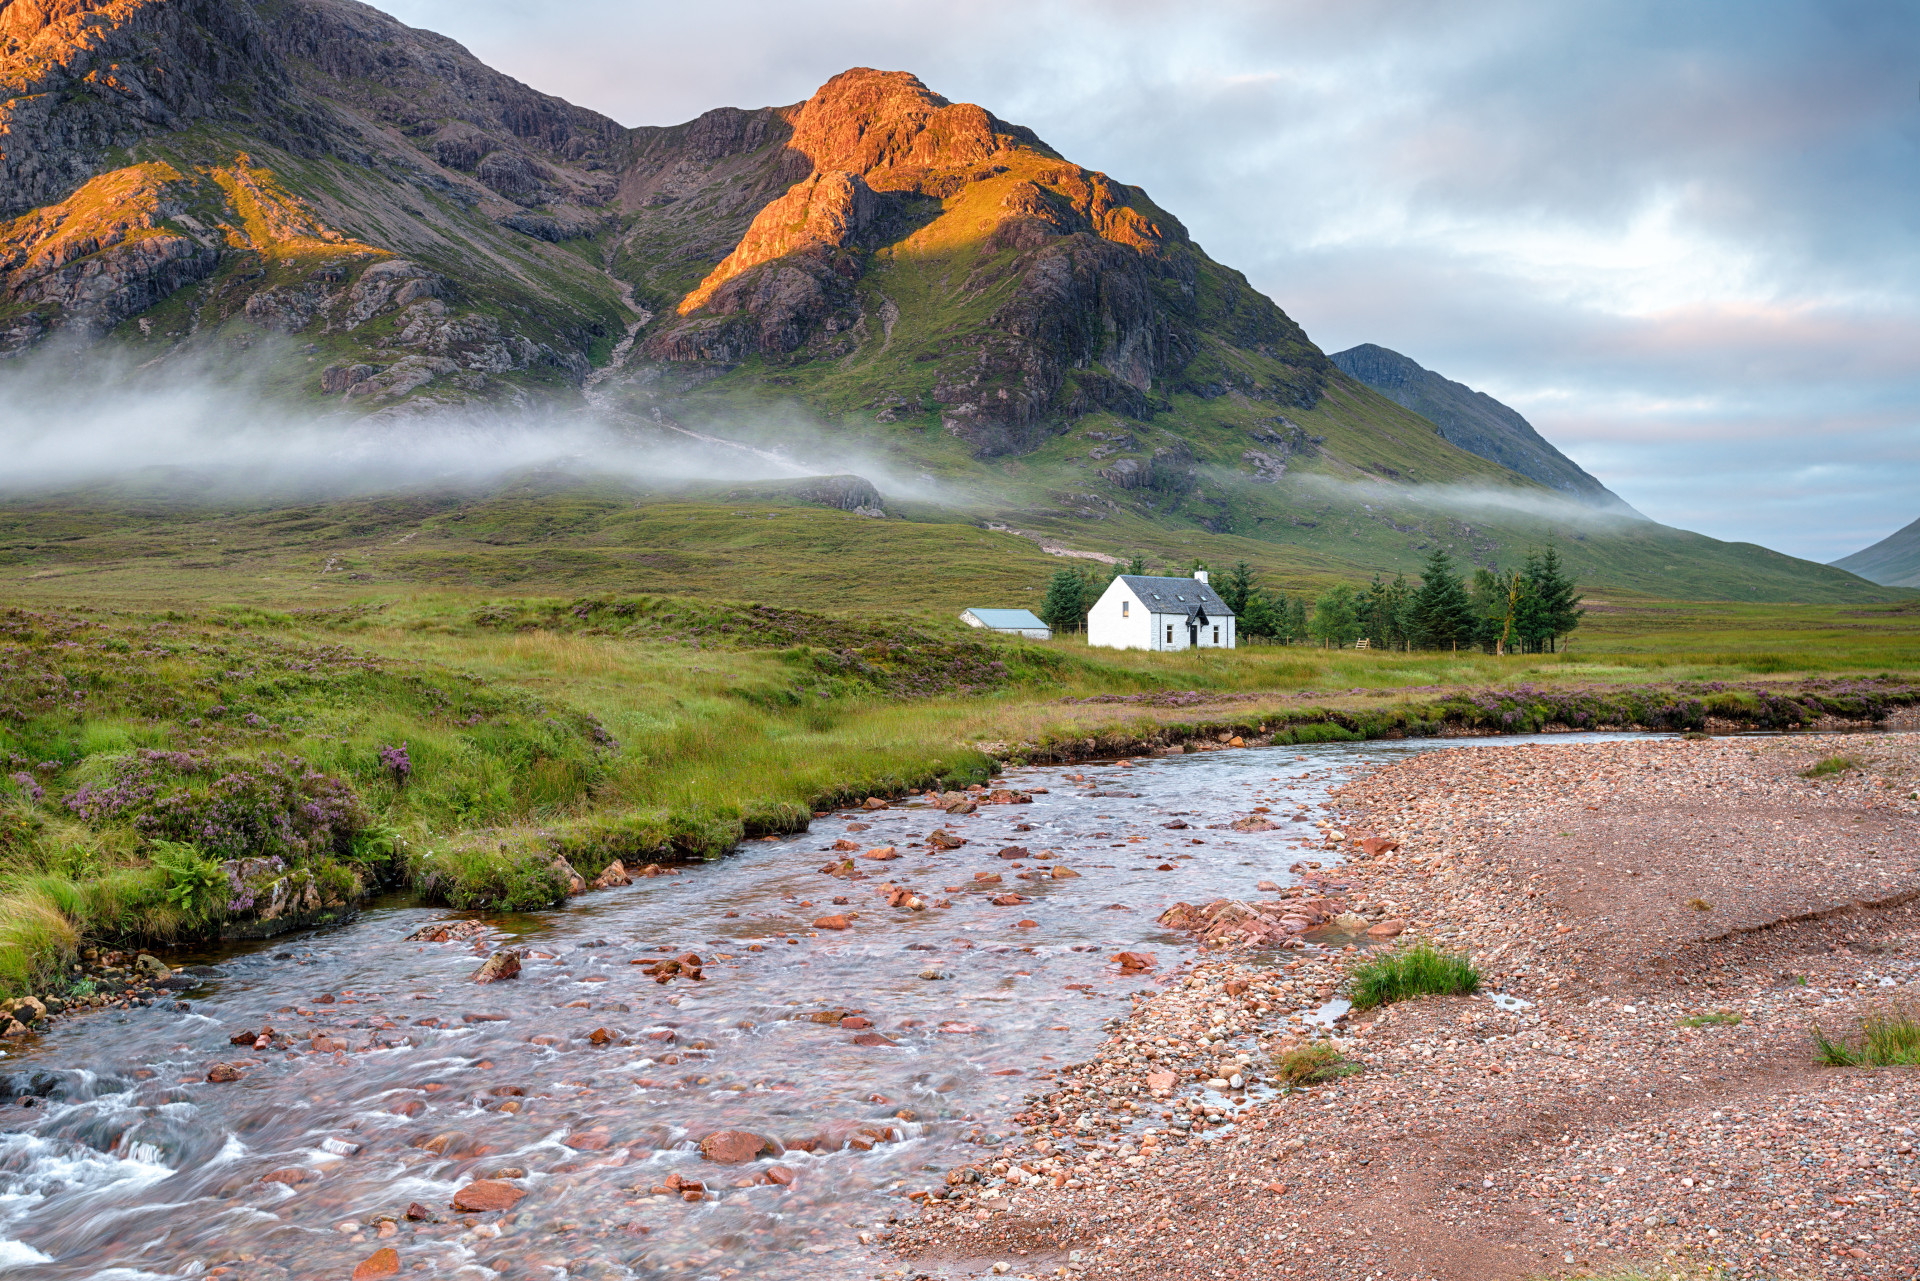 Glen Coe is a protected area, but the A82 gives you the chance to cross it through Glencoe Valley.<p><a href="https://www.msn.com/en-us/community/channel/vid-7xx8mnucu55yw63we9va2gwr7uihbxwc68fxqp25x6tg4ftibpra?cvid=94631541bc0f4f89bfd59158d696ad7e">Follow us and access great exclusive content every day</a></p>